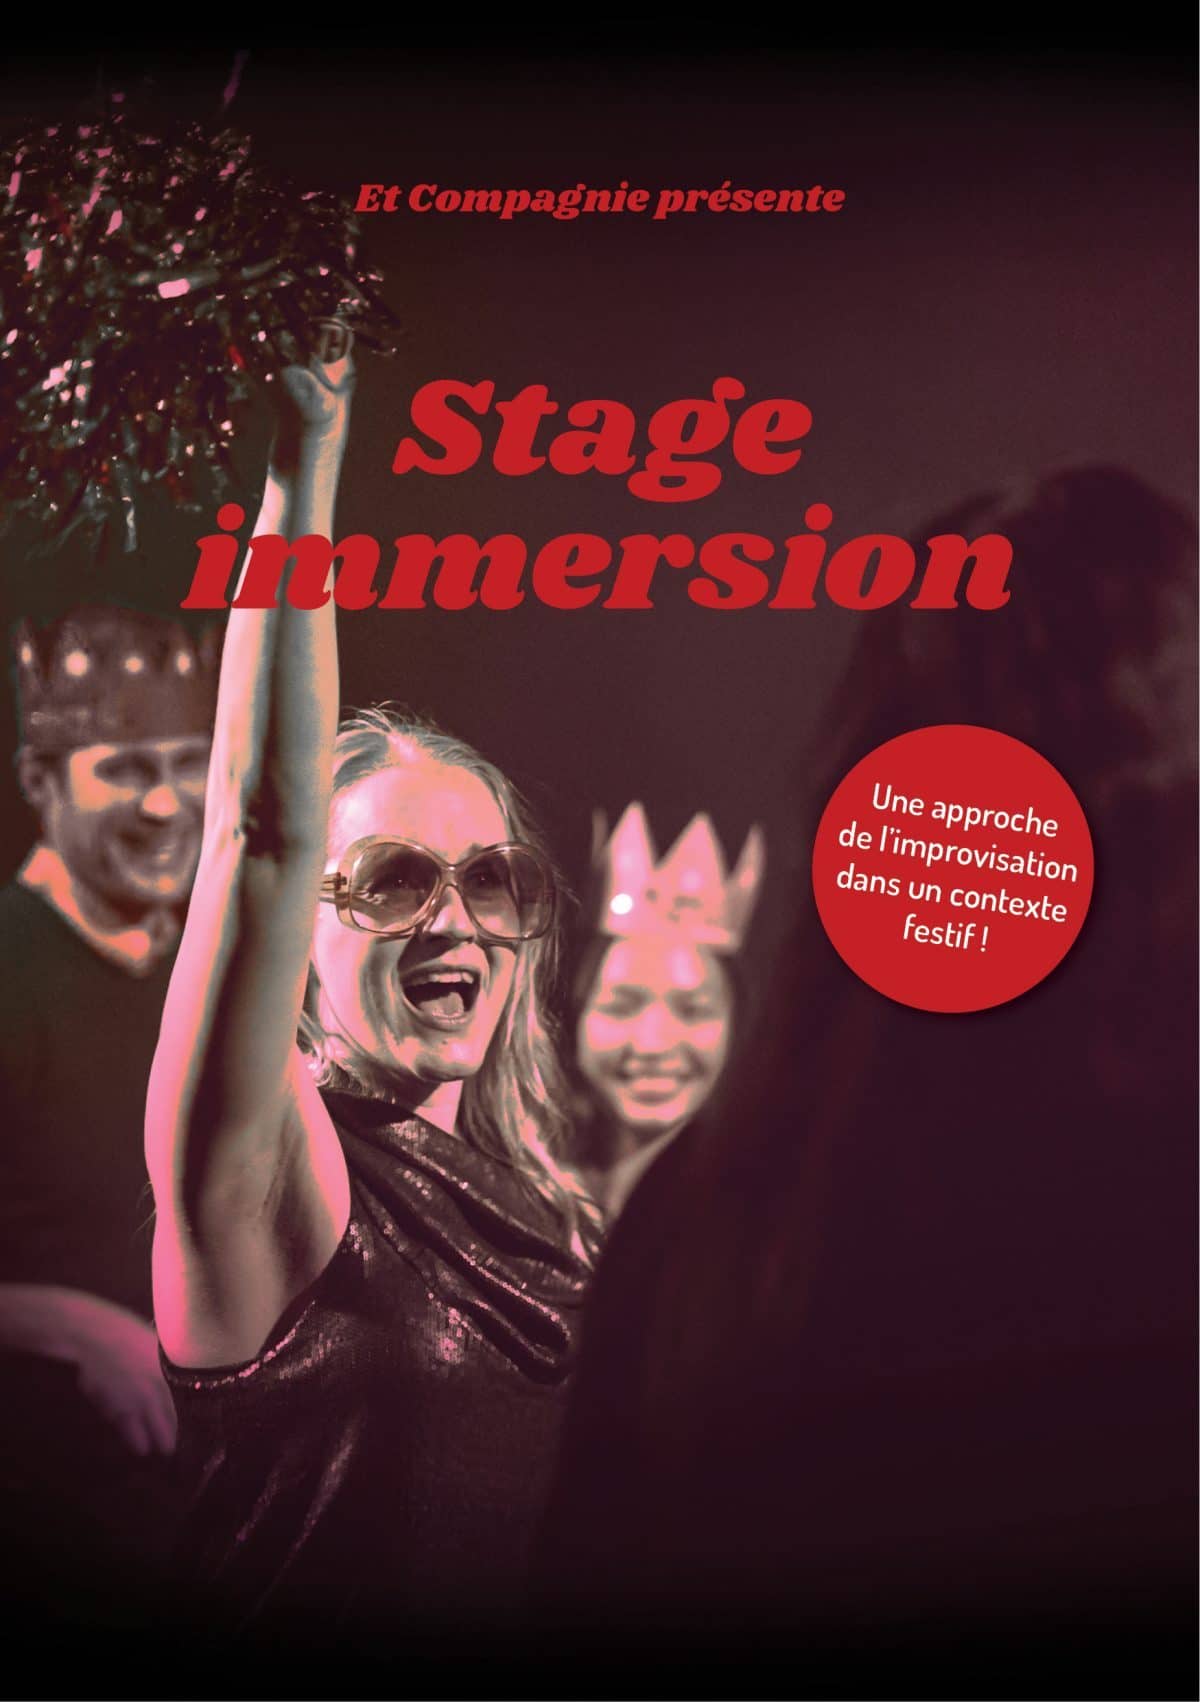 Stage immersion